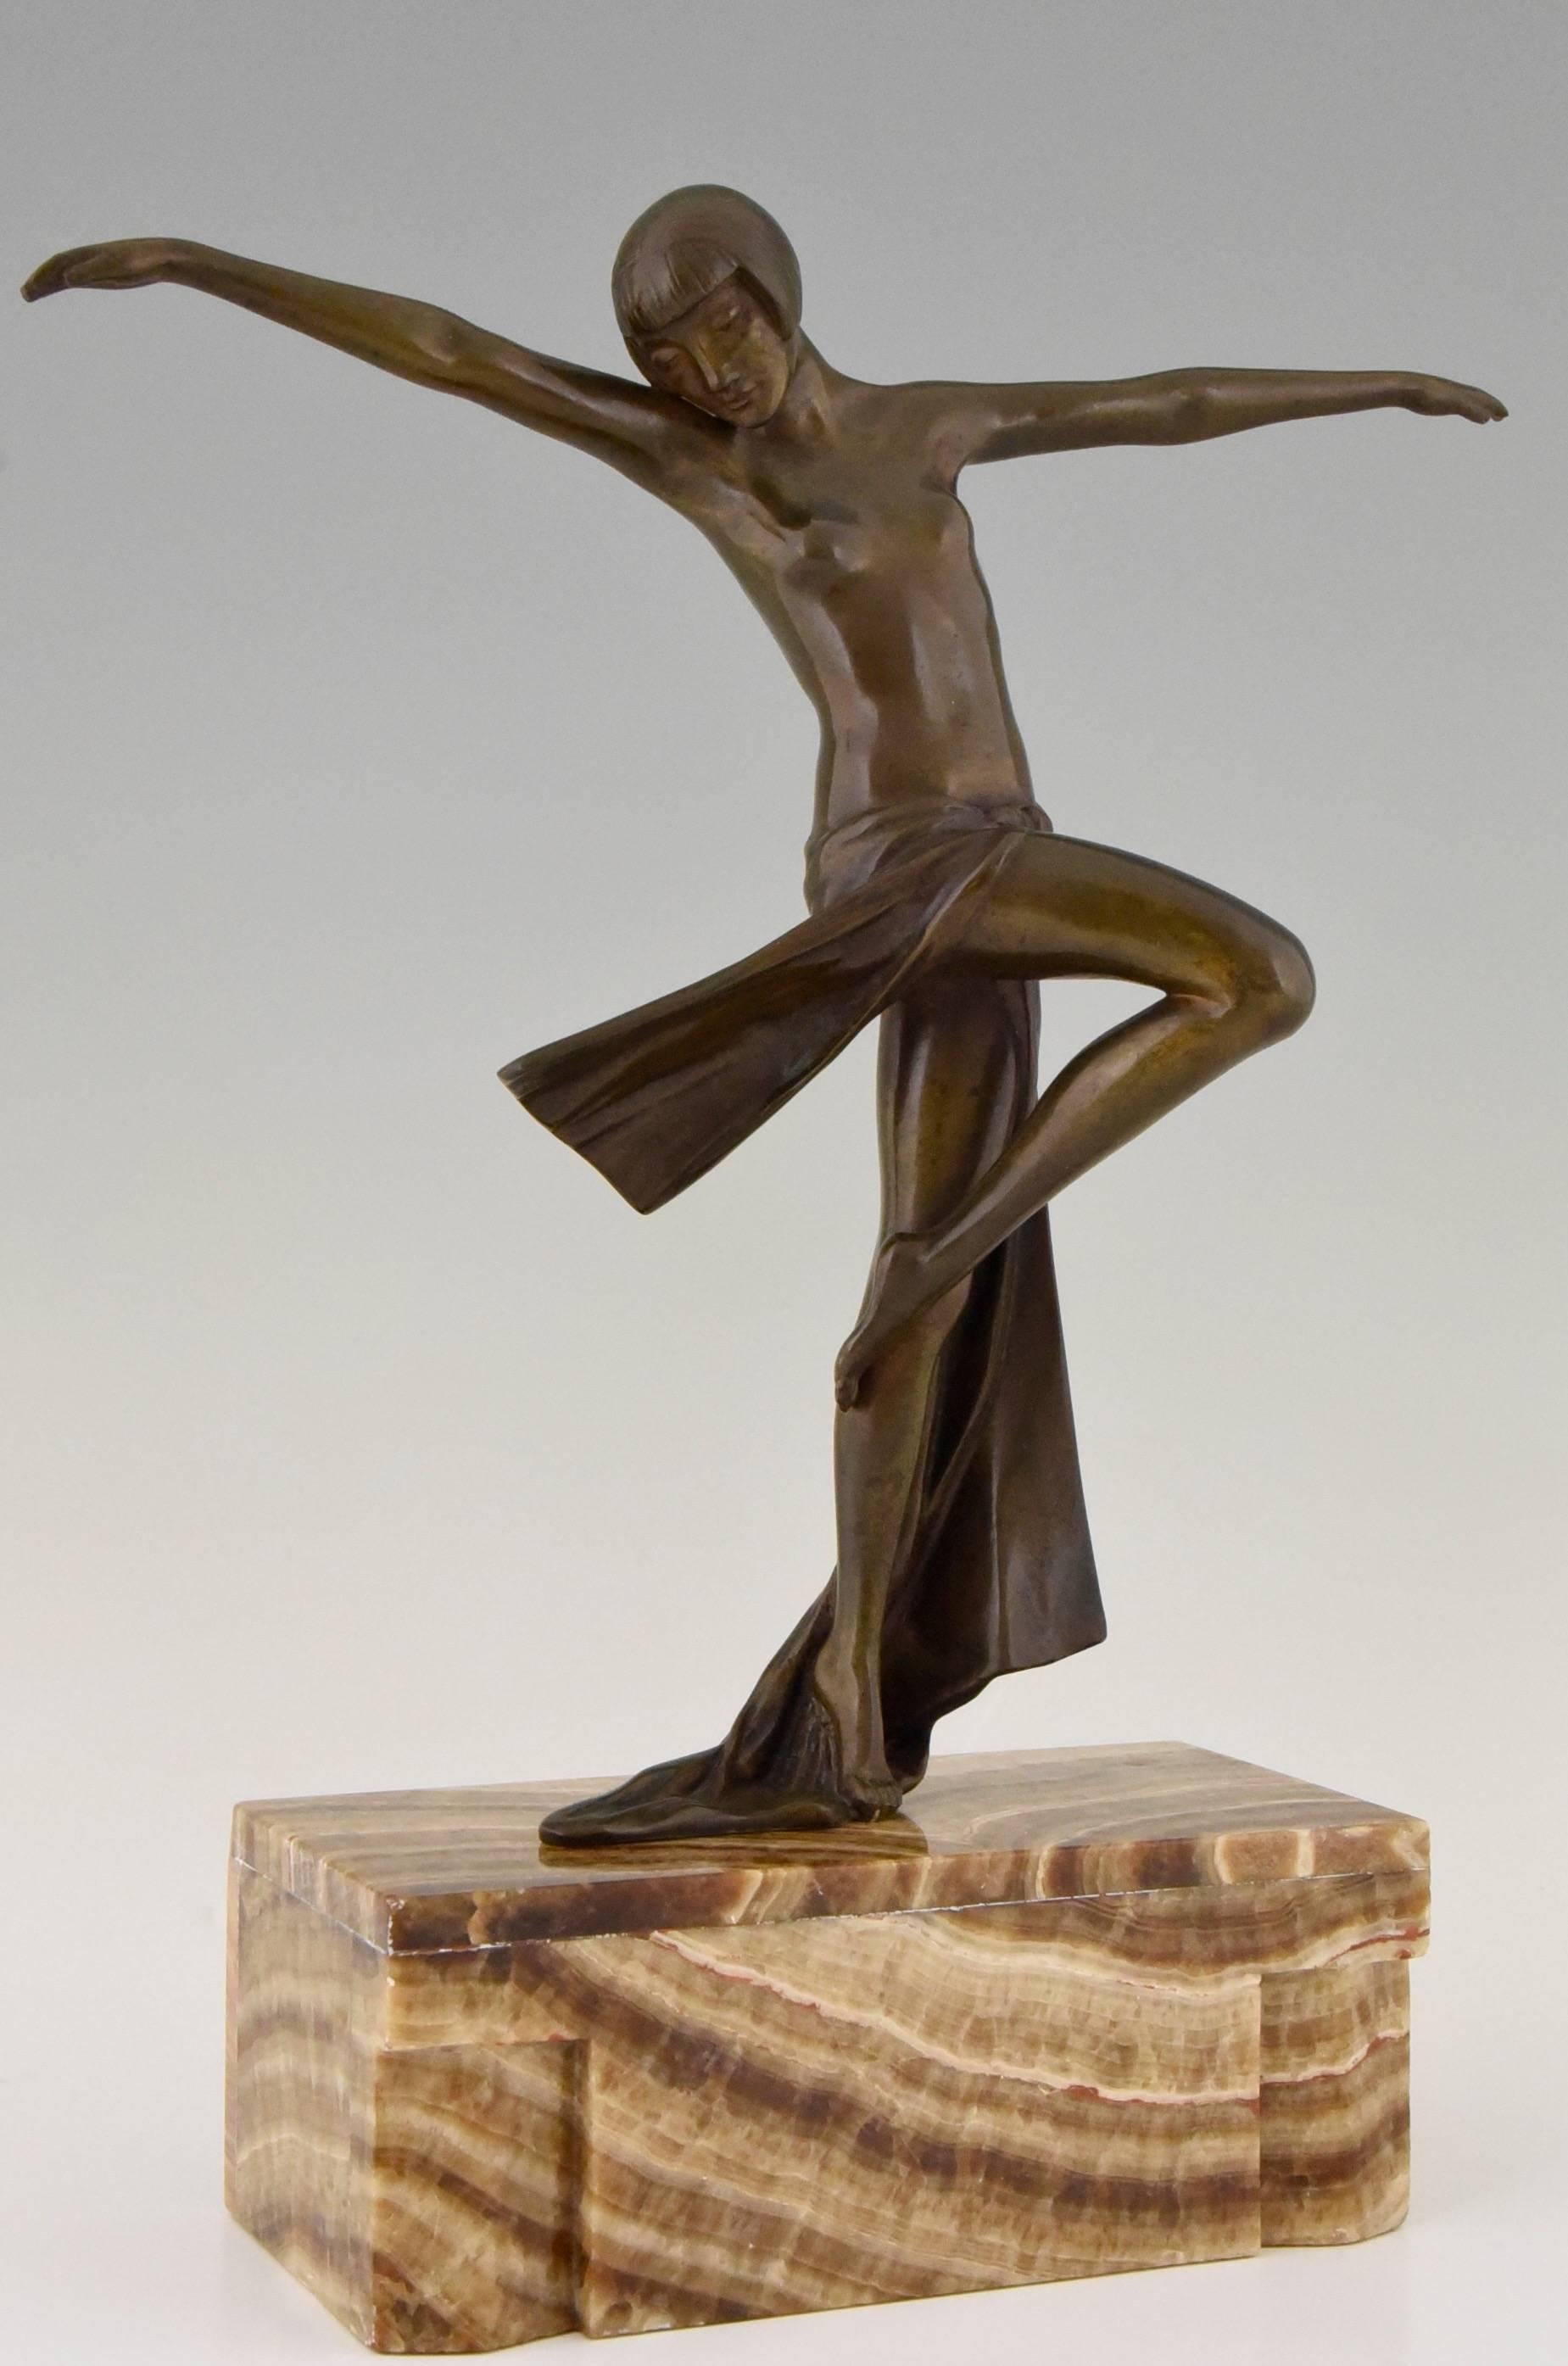 An elegant Art Deco dancing lady on marble base.
By Claire Jeanne Roberte Colinet,
Signature or marks:  Colinet.

Size:  
H. 15 inch x L. 11.8 inch x W. 4.3 inch.
H. 38 cm x L. 30 cm. x W. 11 cm. 

Literature about the artist: 
“Art Deco